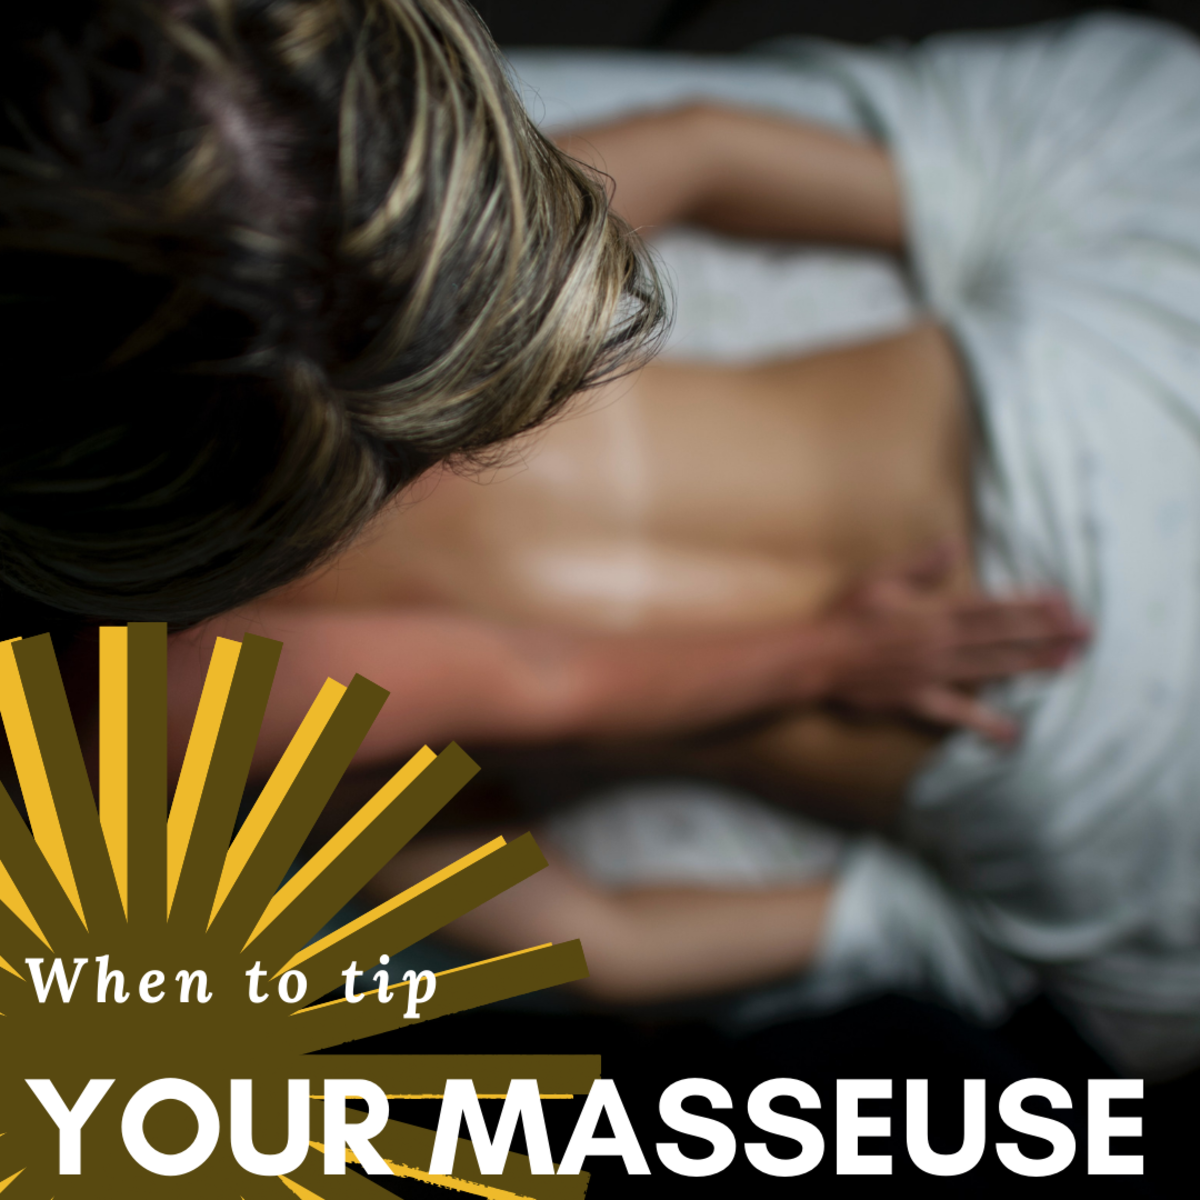 The Dos and Don’ts of Tipping Your Massage Therapist